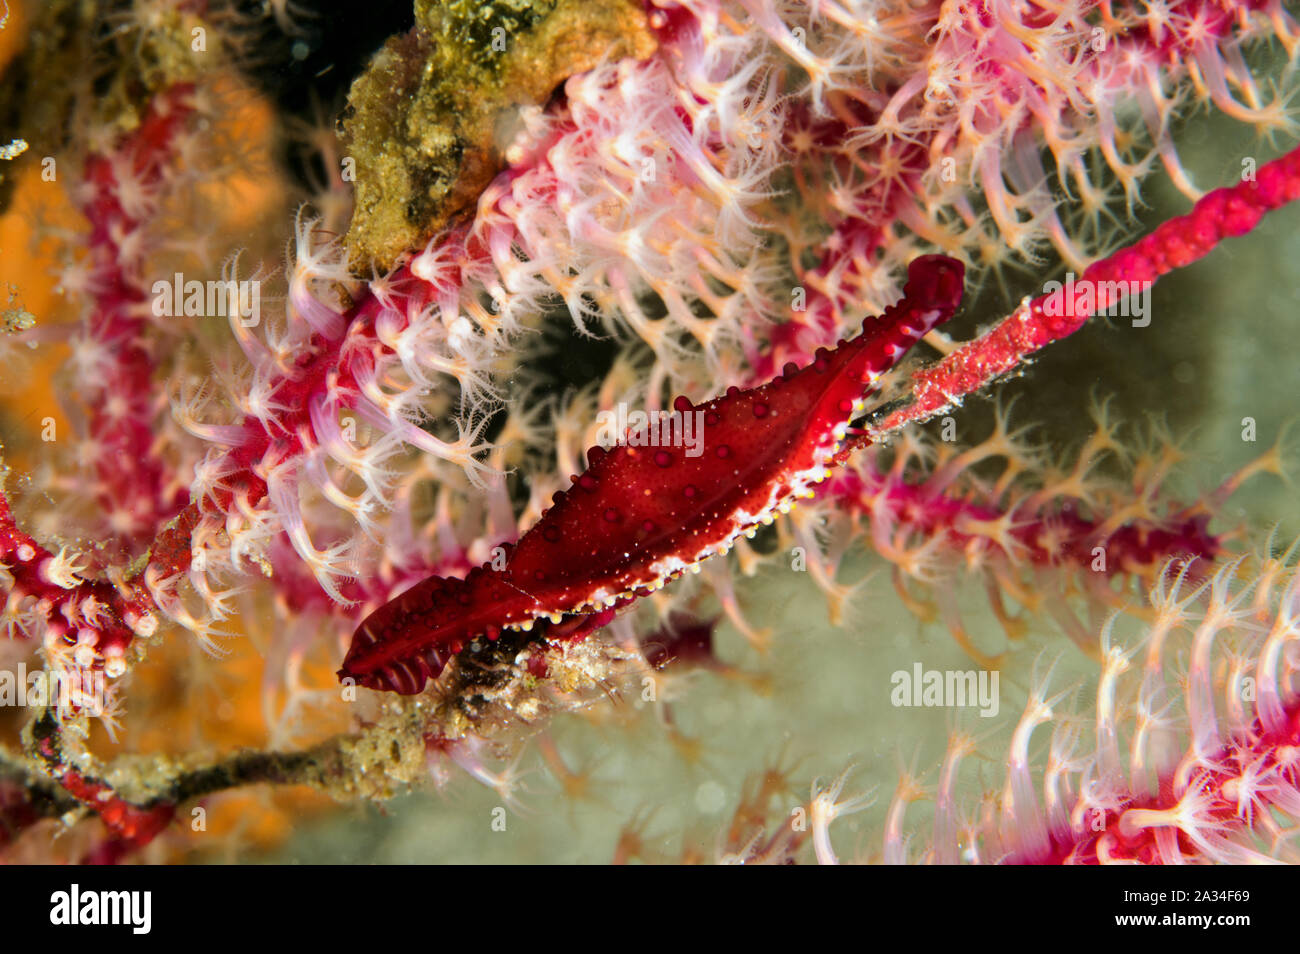 Rosy spindle cowrie, Phenacovolva rosea, clinging on a seafan, Sulawesi Indonesia. Stock Photo